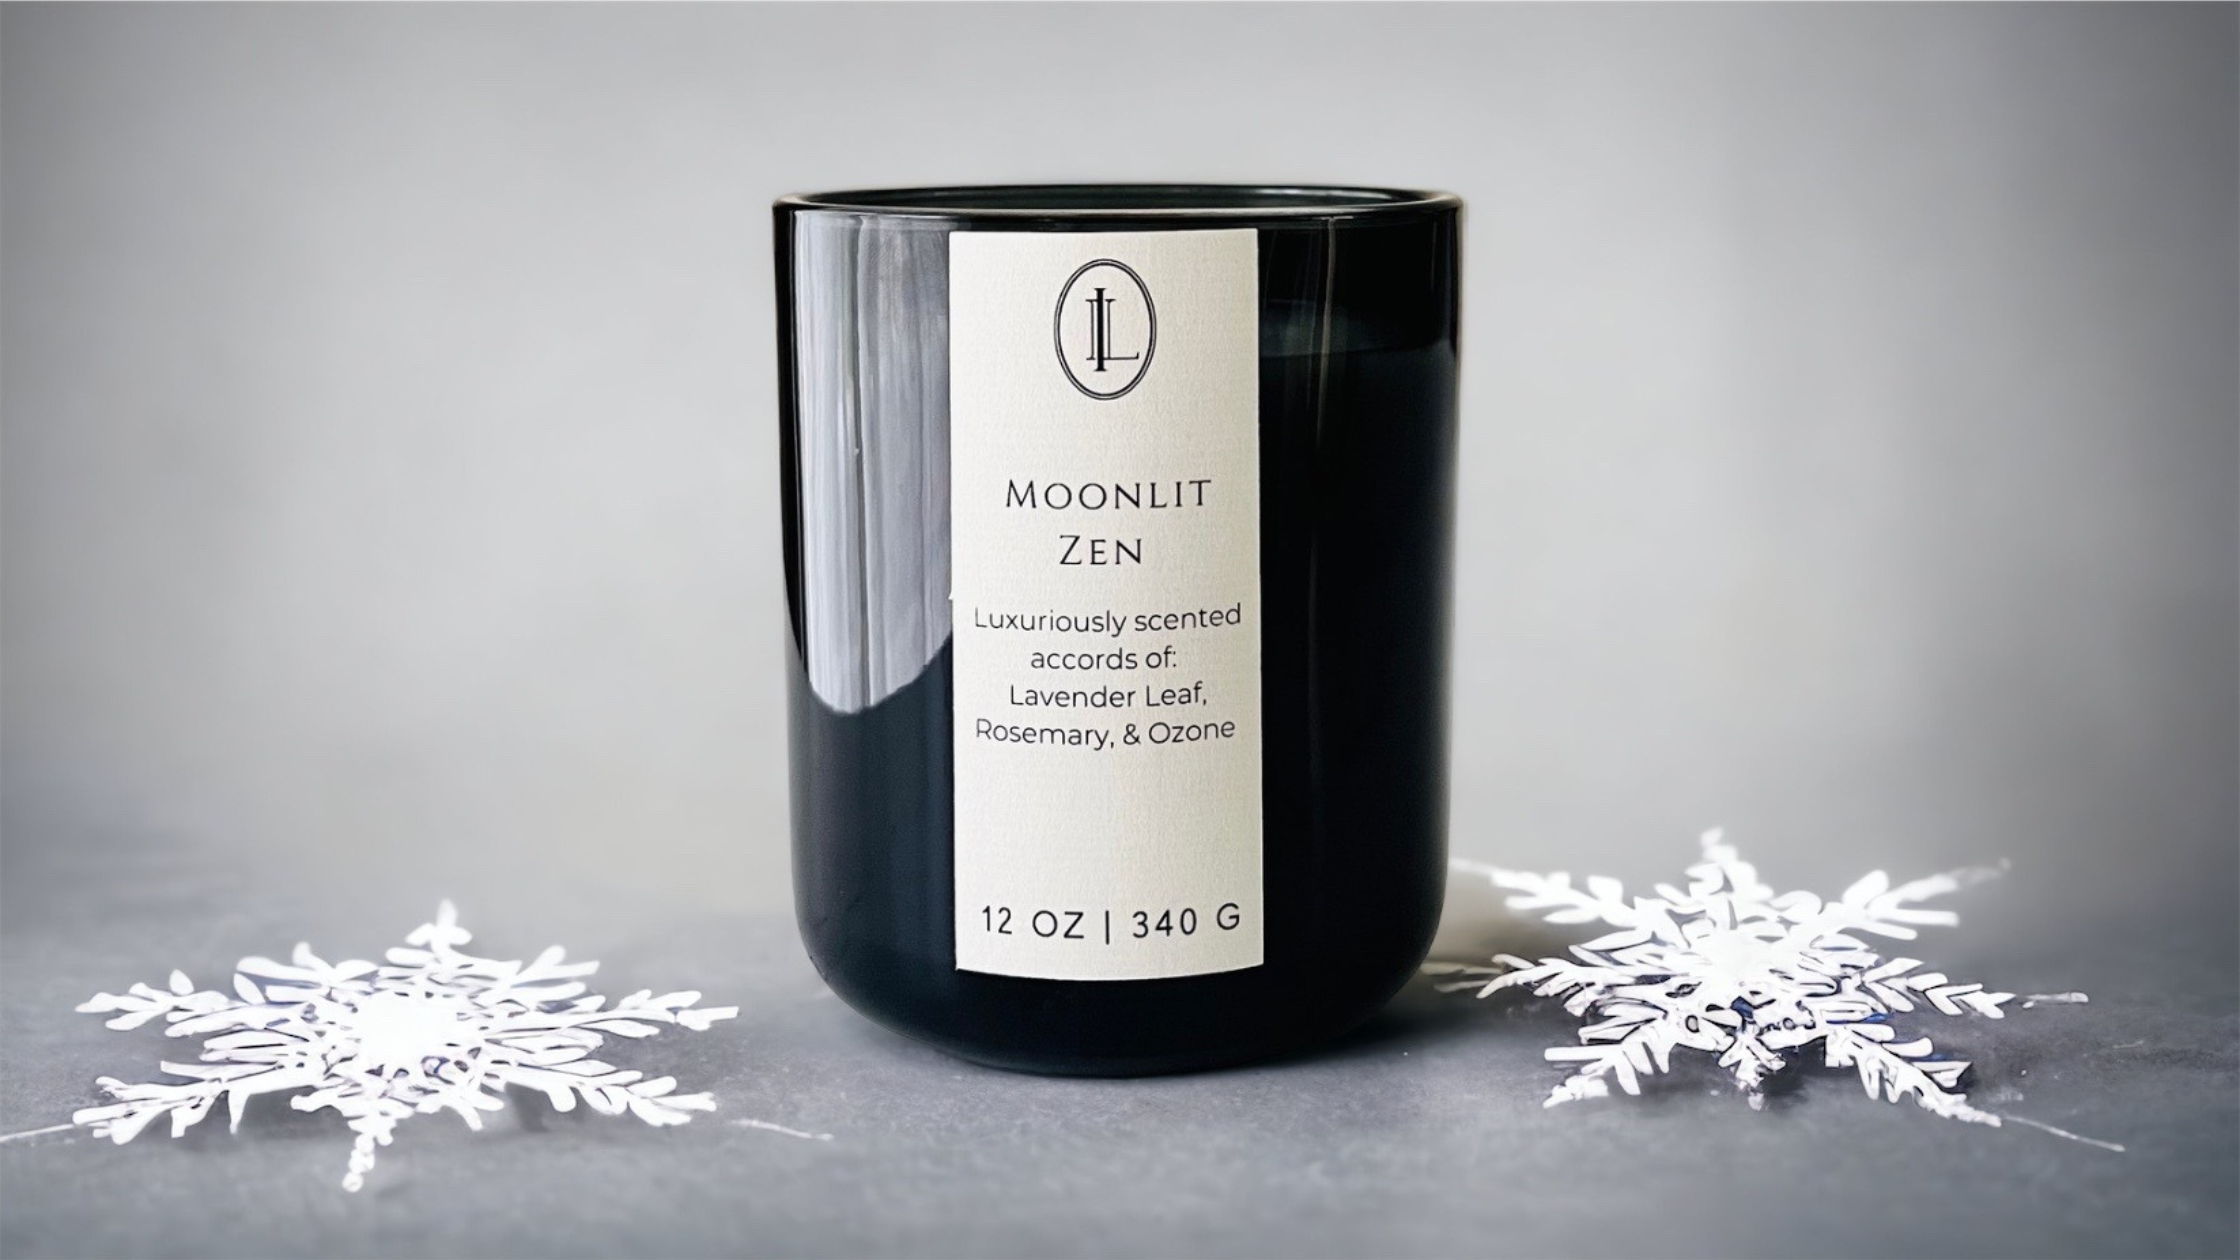 Image of Moonlit Zen Candle on gray background with snowflakes